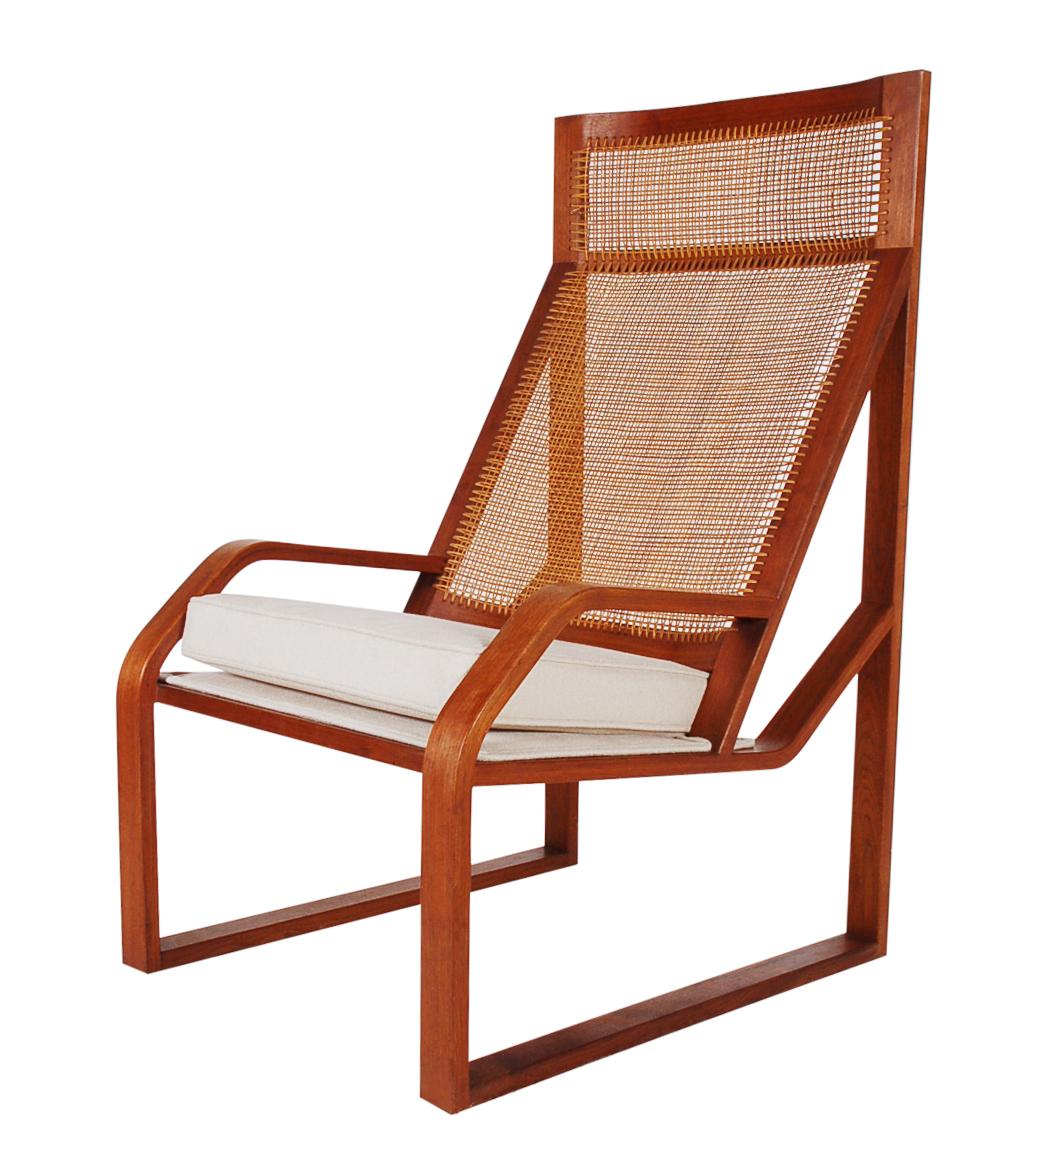 Fabric Unusual Large Scale Midcentury Danish Modern Cane and Teak Lounge Chair Armchair